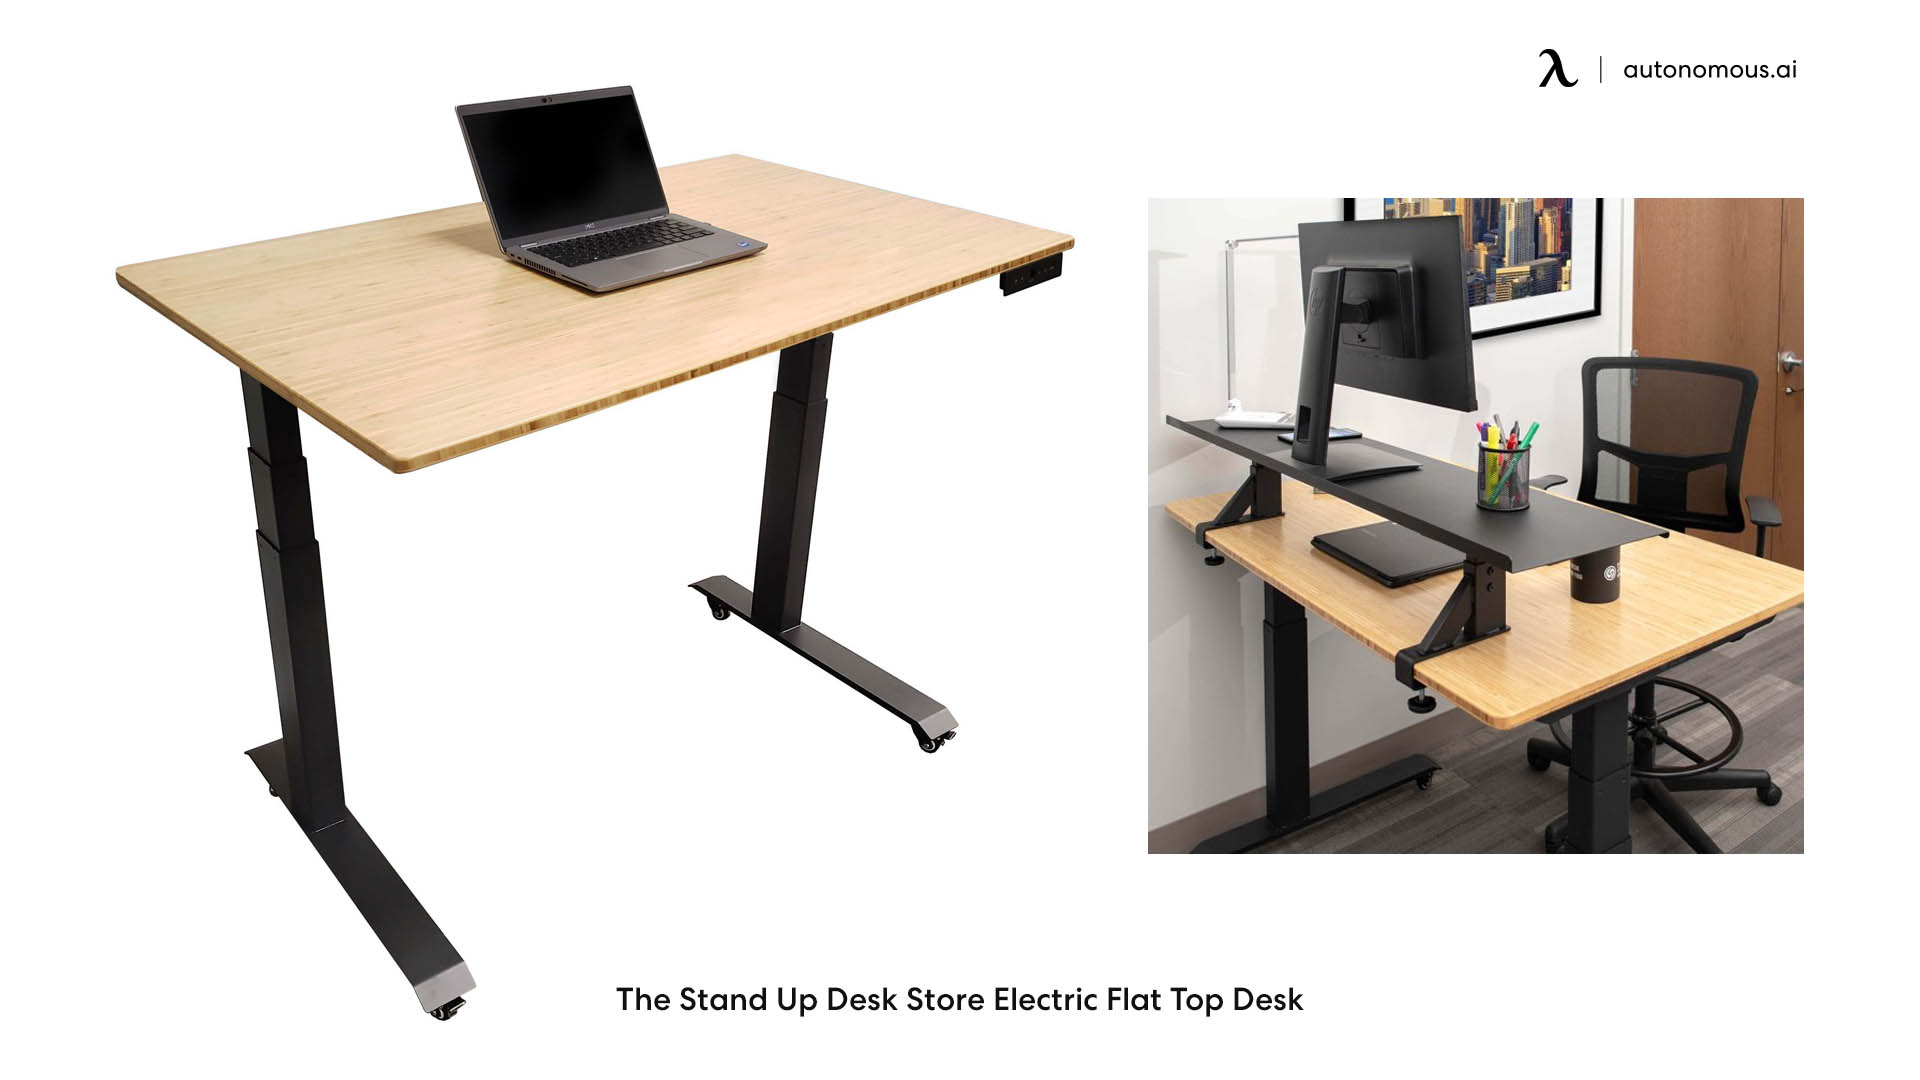 The Stand Up Desk Store Desk